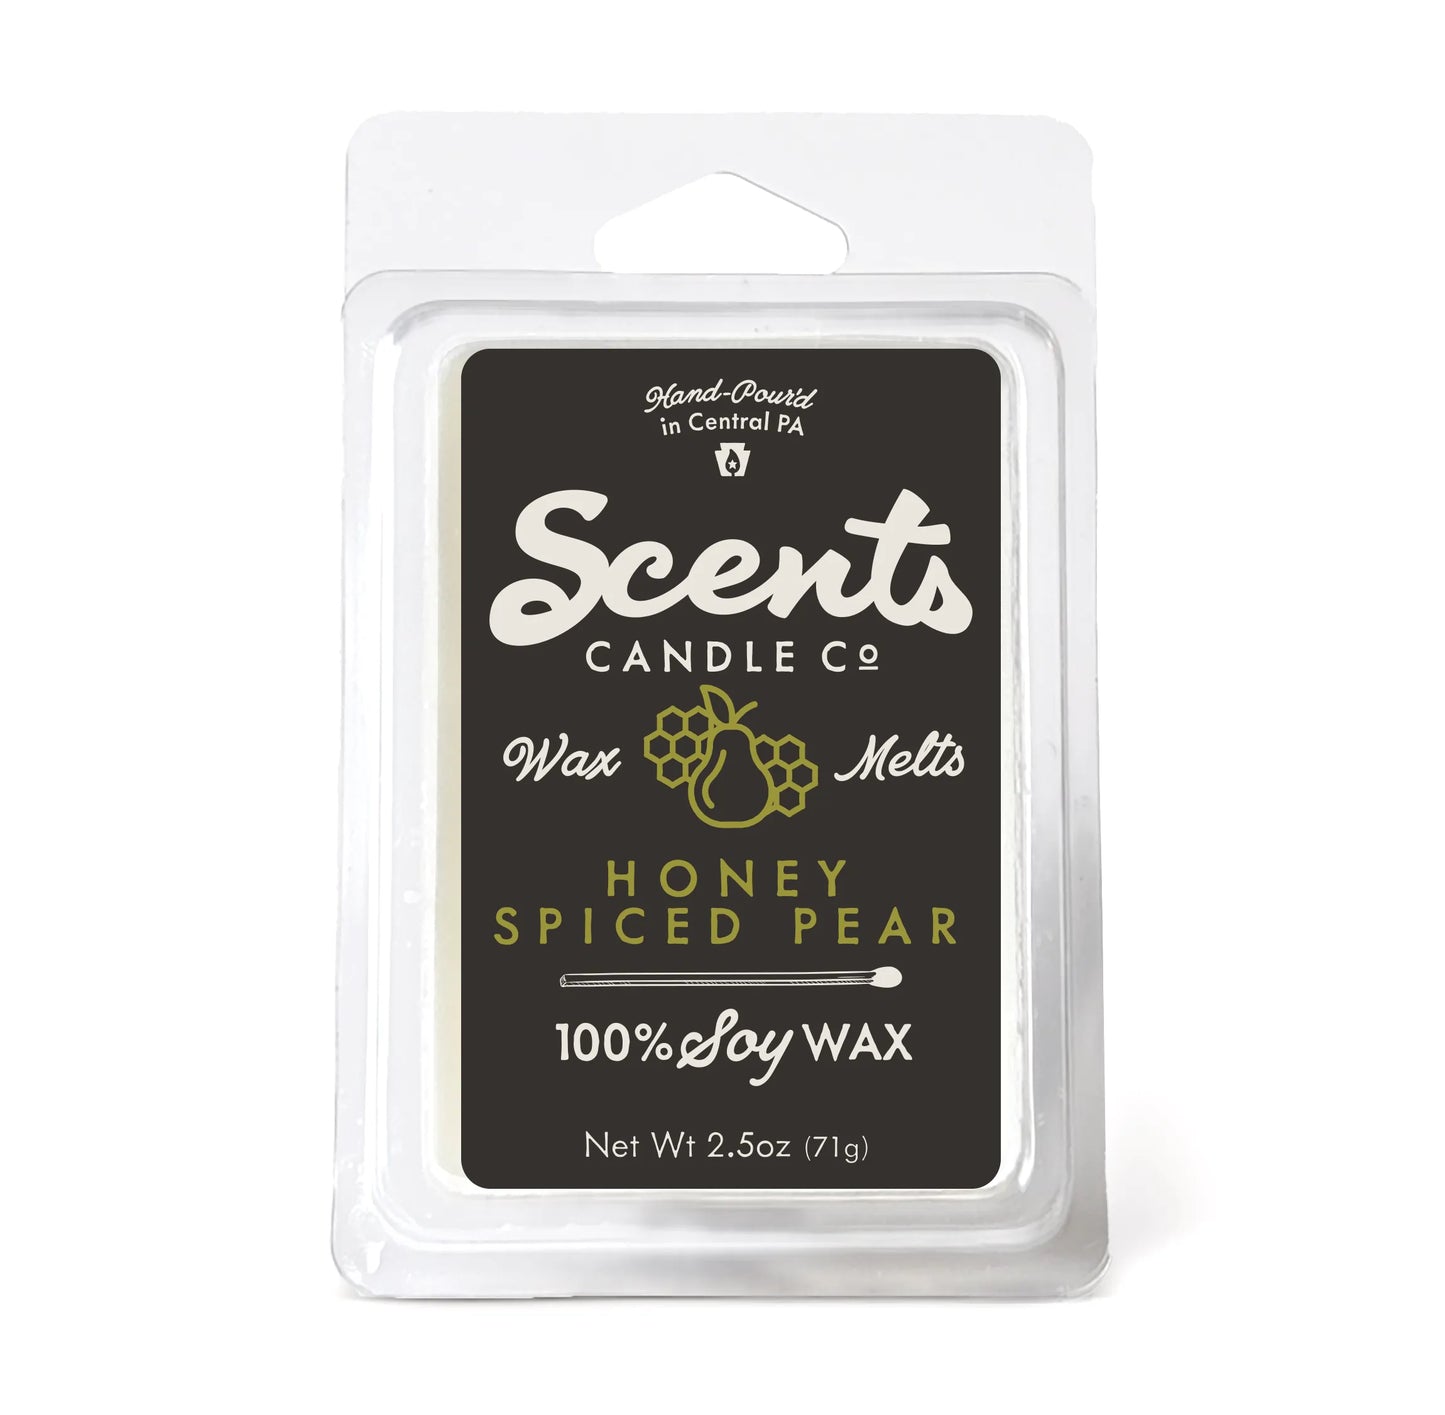 Scents Candle Co. Honey Spiced Pear Wax Melt